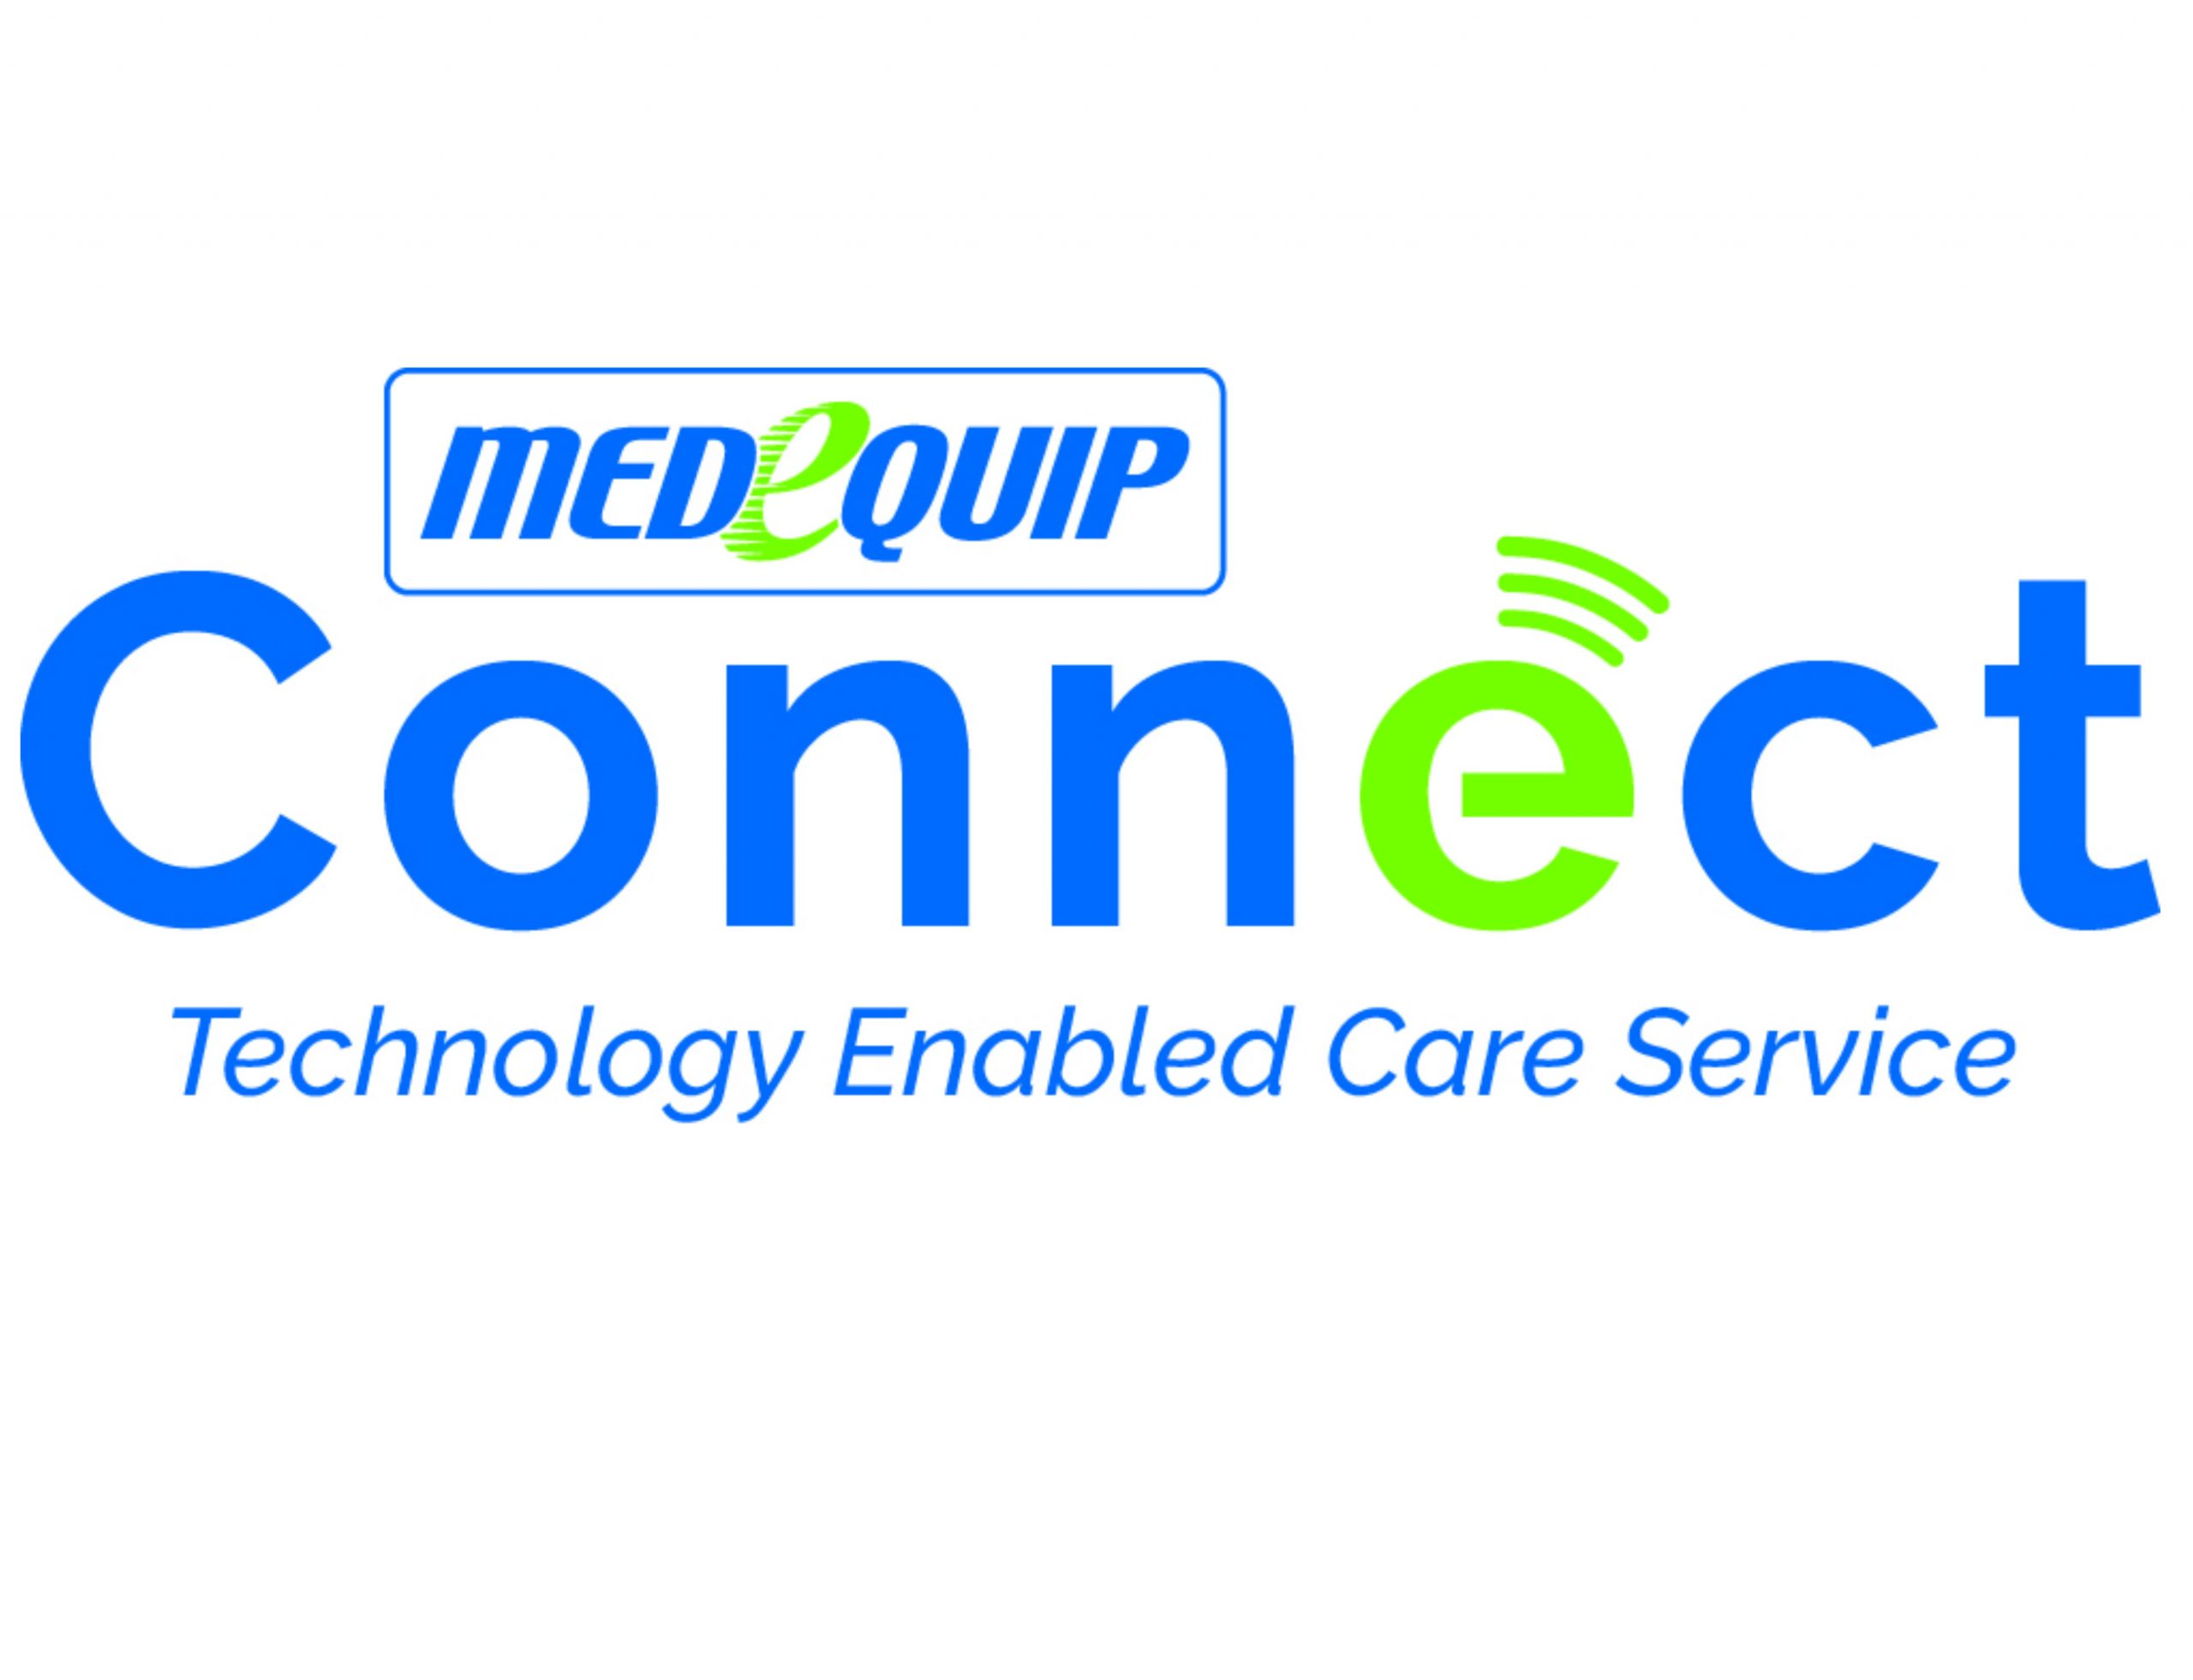 Wirral partner with Medequip & Alcuris to unveil digital telecare transformation at borough-wide scale